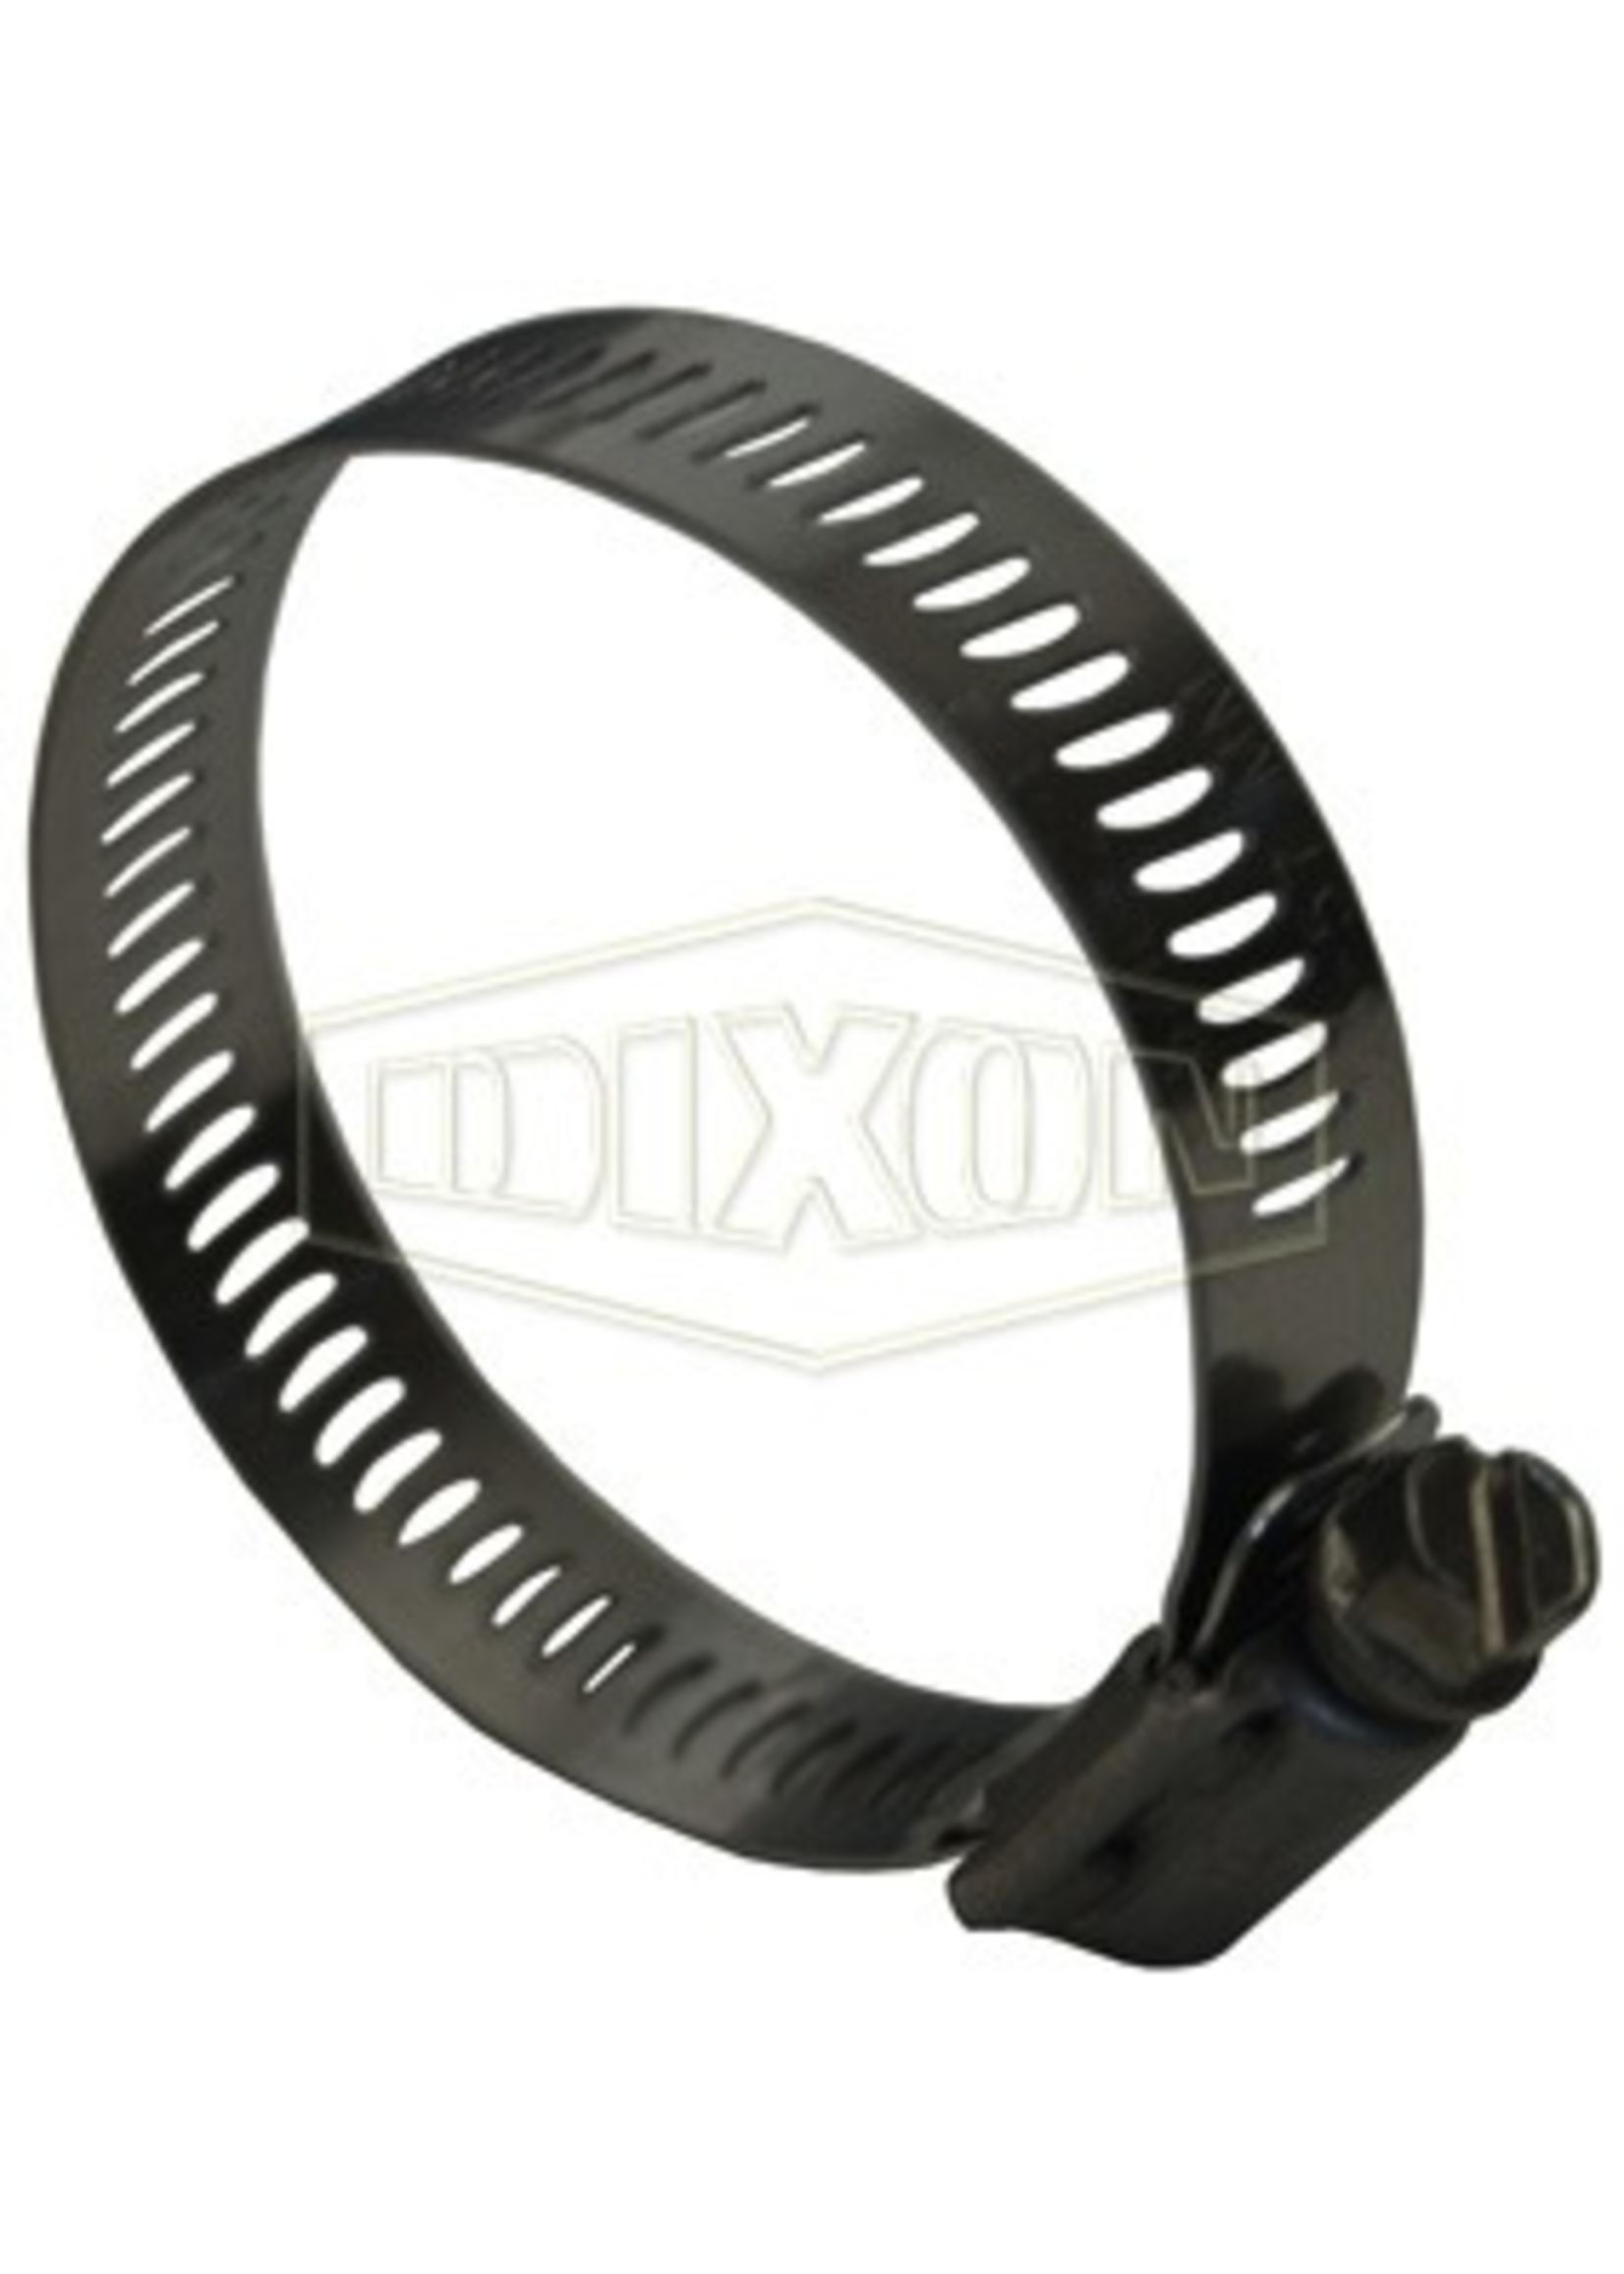 DIXON Hose Clamp 9/16in To 1+1/16in